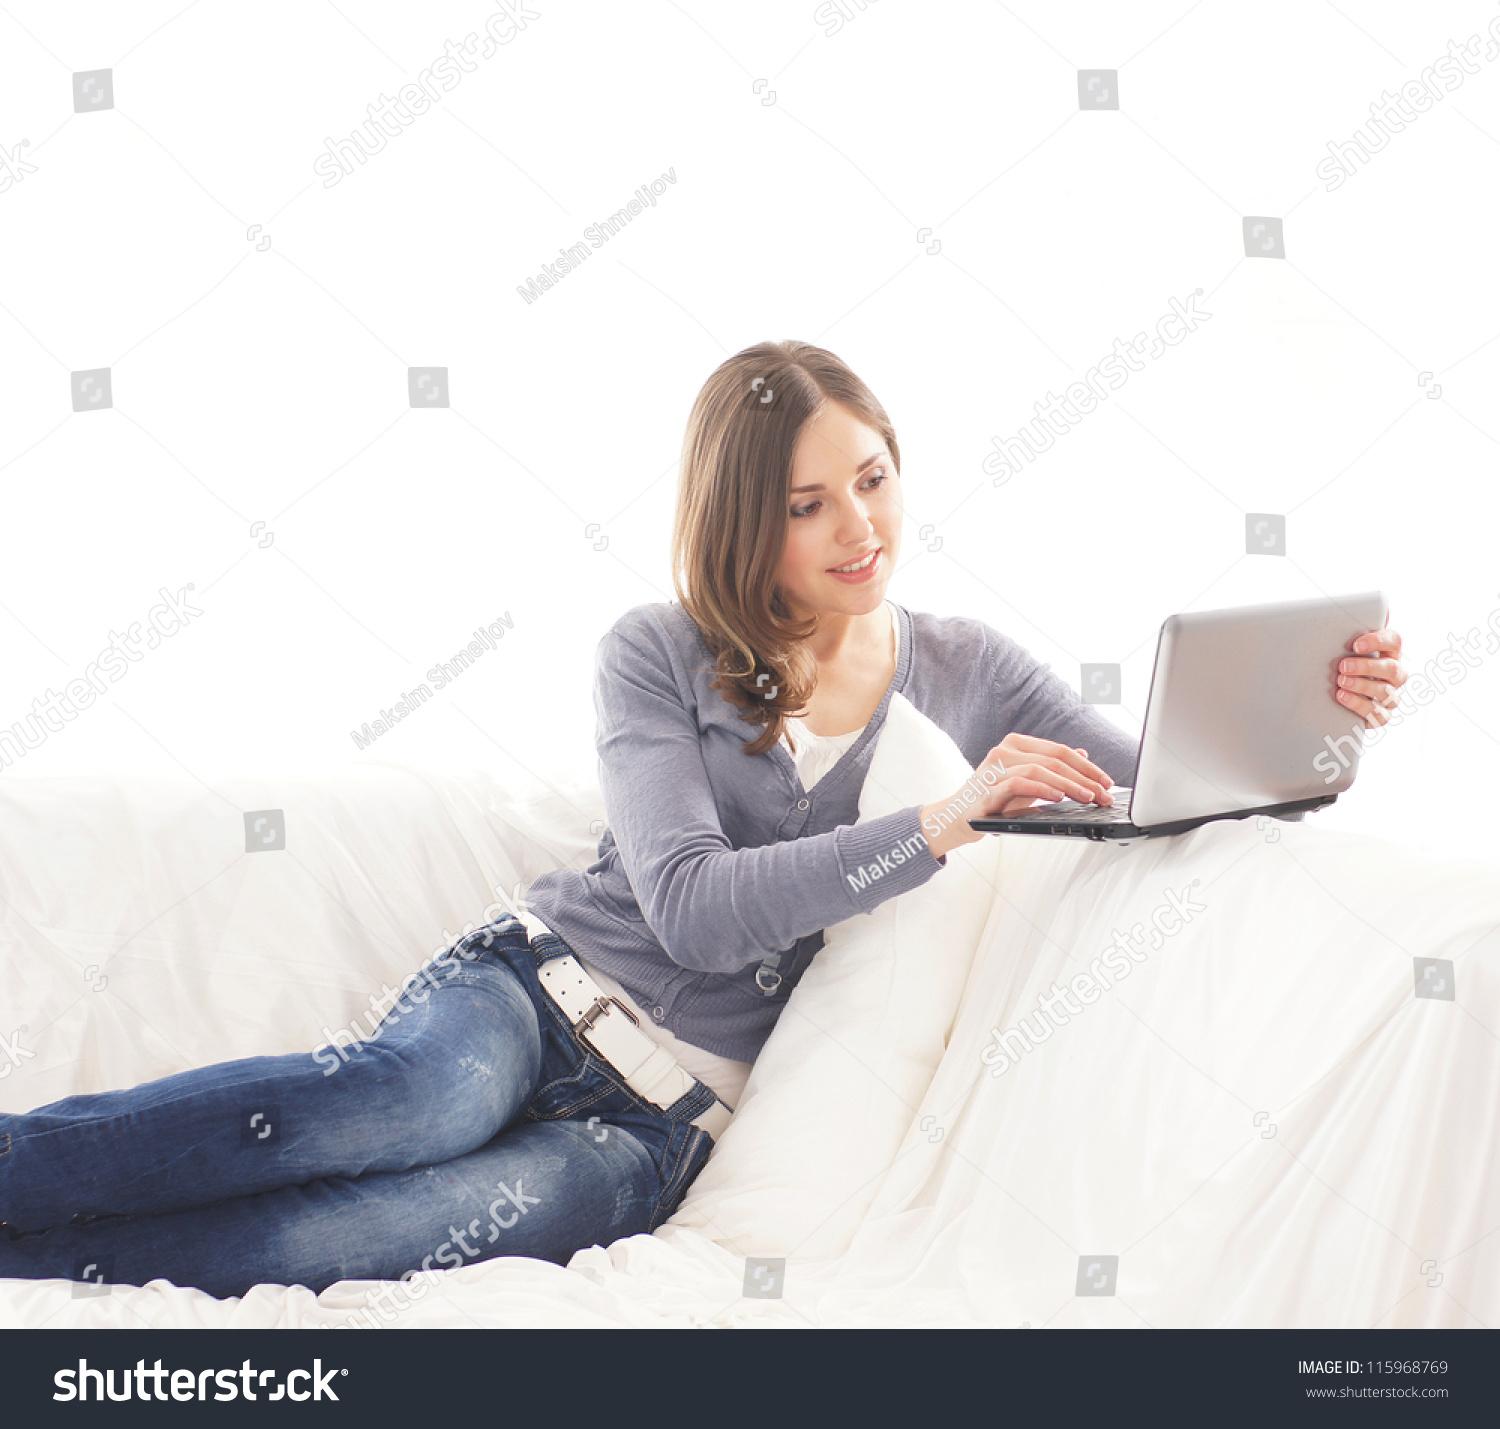 Young Attractive Girl Laptop Sitting Relaxing Stock Photo 115968769 ...